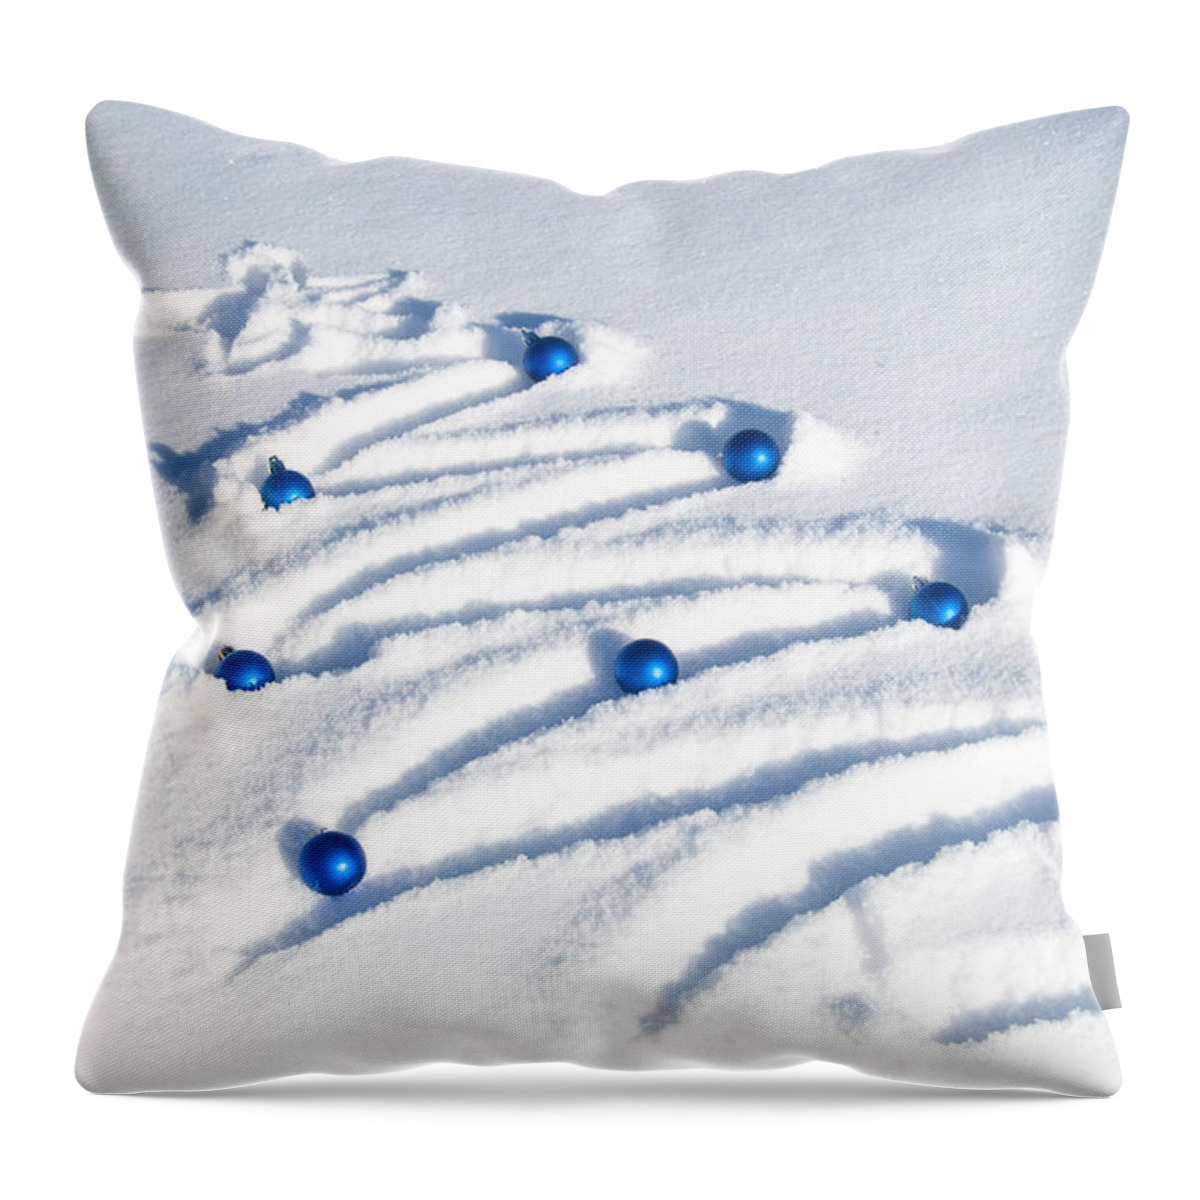 Bauble Throw Pillow featuring the photograph Snow Tree by Juli Scalzi